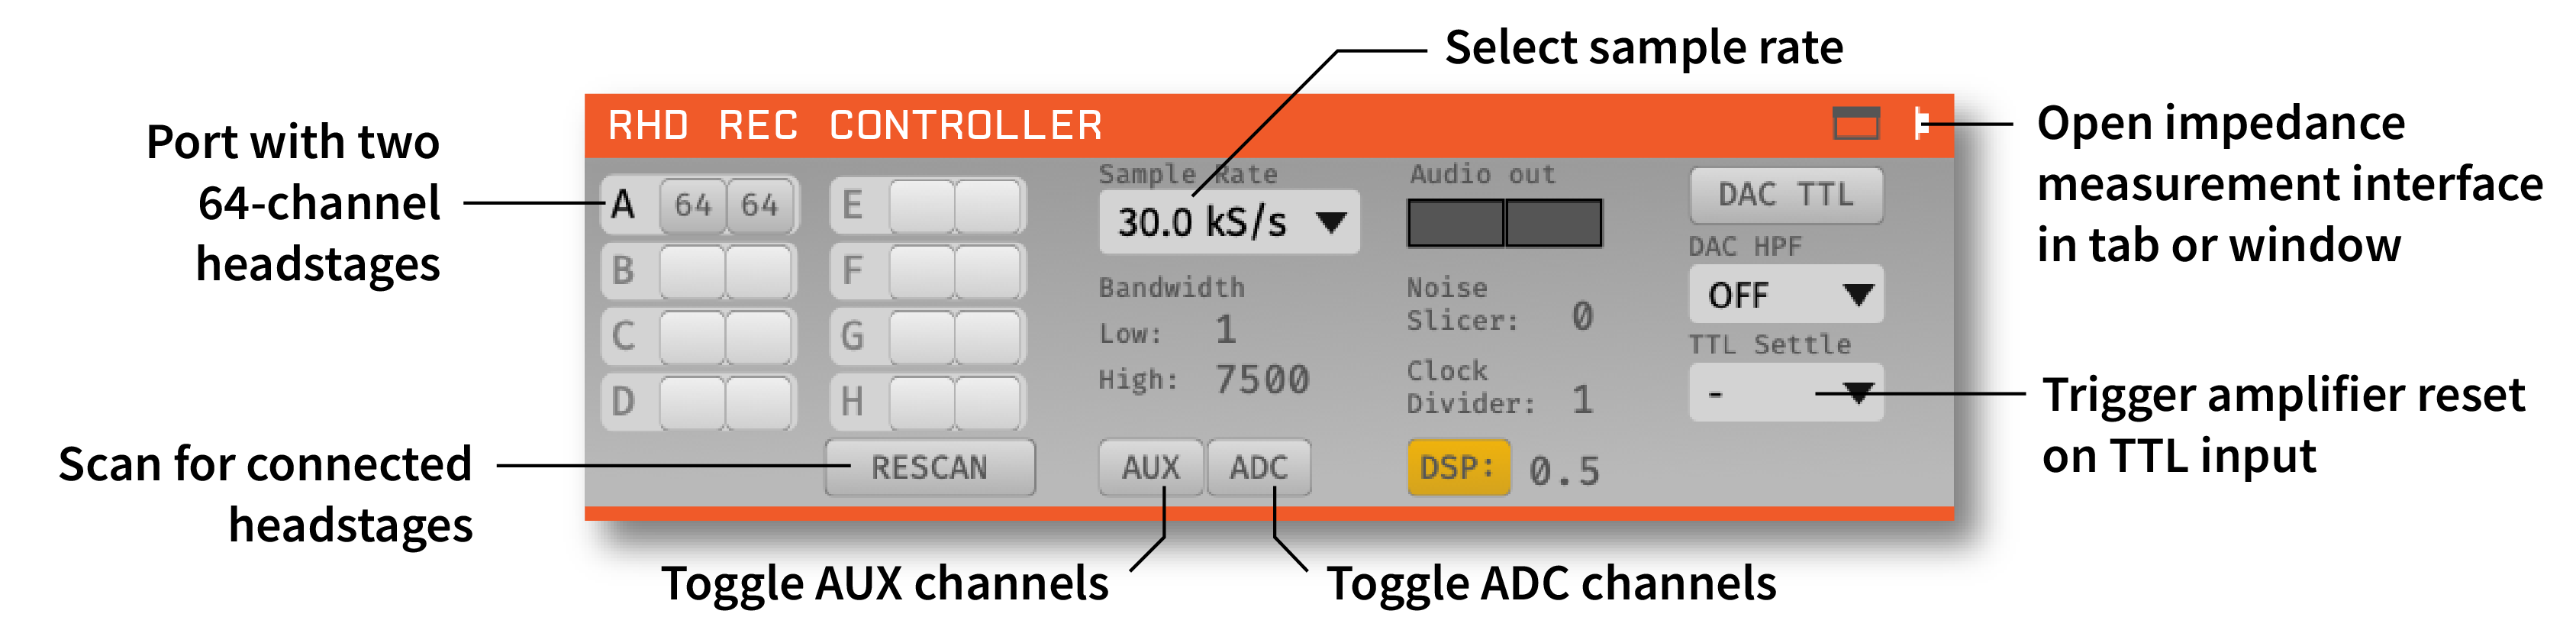 Annotated settings interface for the RHD Rec Controller plugin